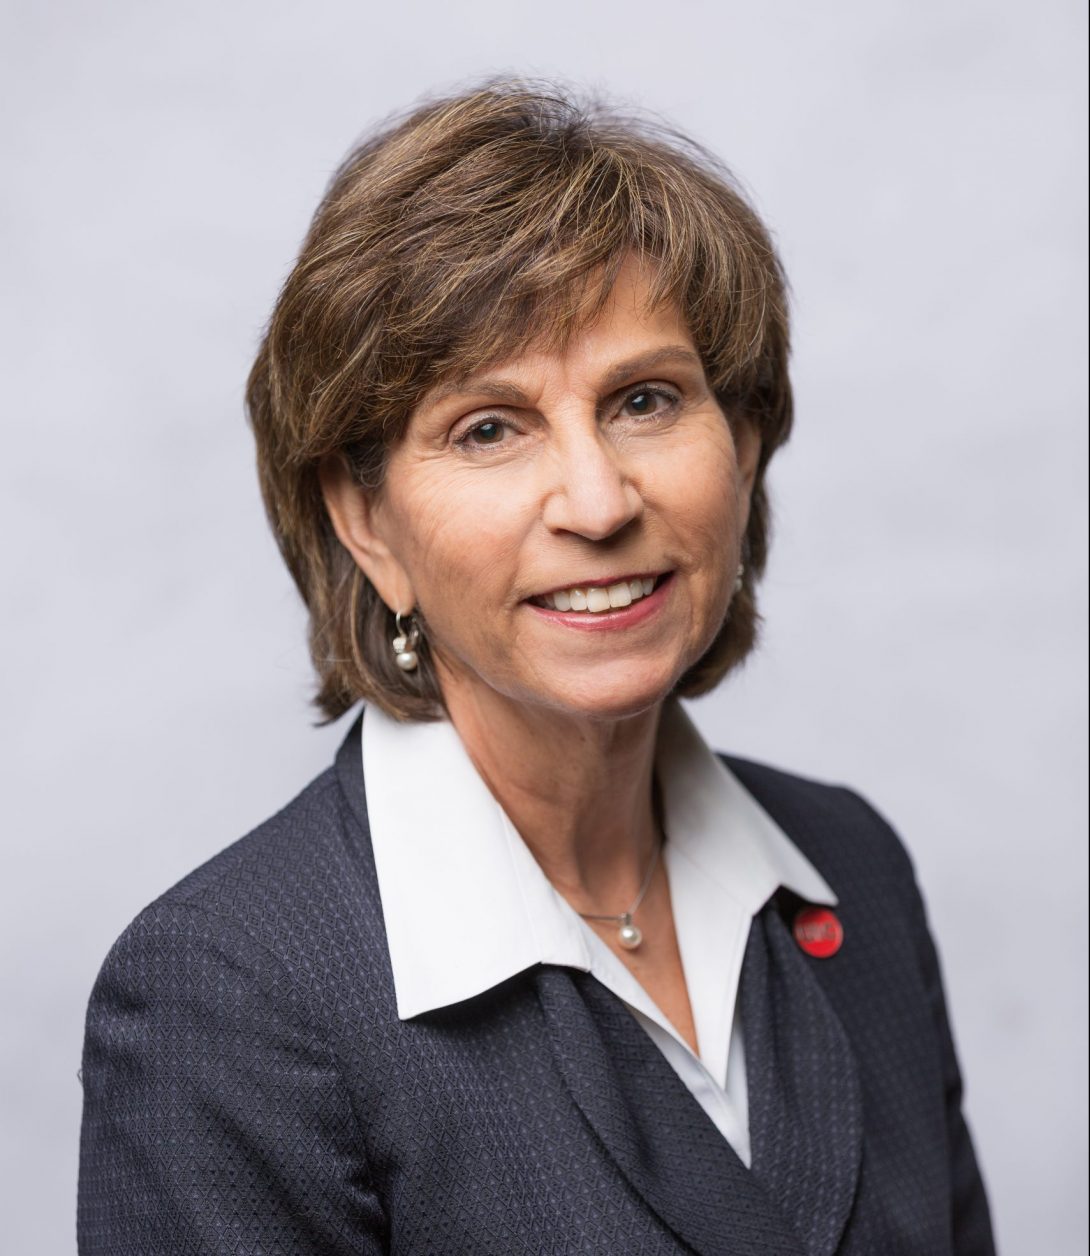 Dr. Susan Rowan wearing a navy jacket with a red UIC pin